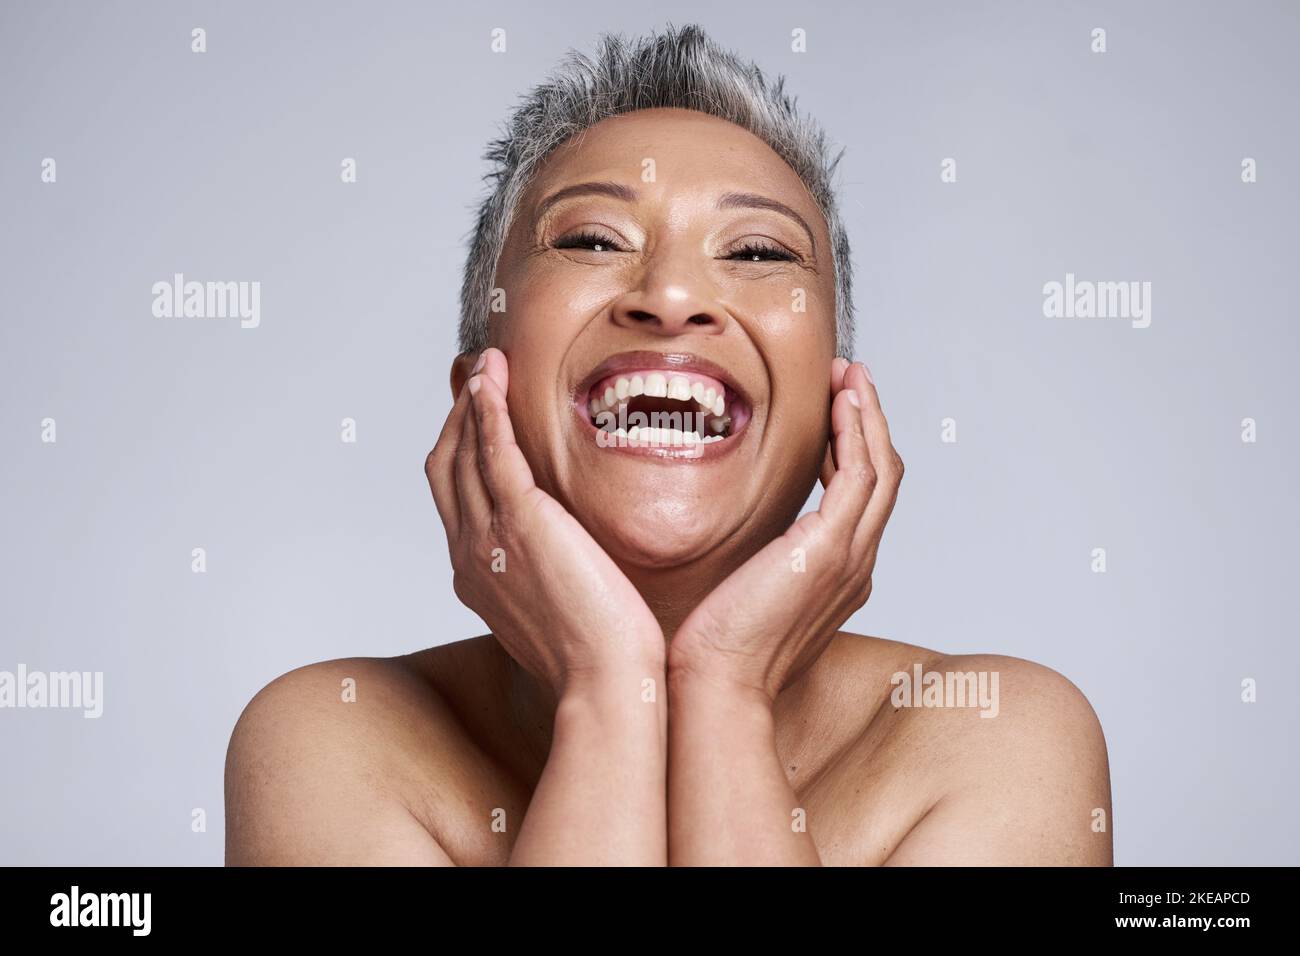 Happy, smile or skincare of senior woman in studio portrait for health, botox or natural cosmetic routine treatment. Skin facial or comic elderly Stock Photo